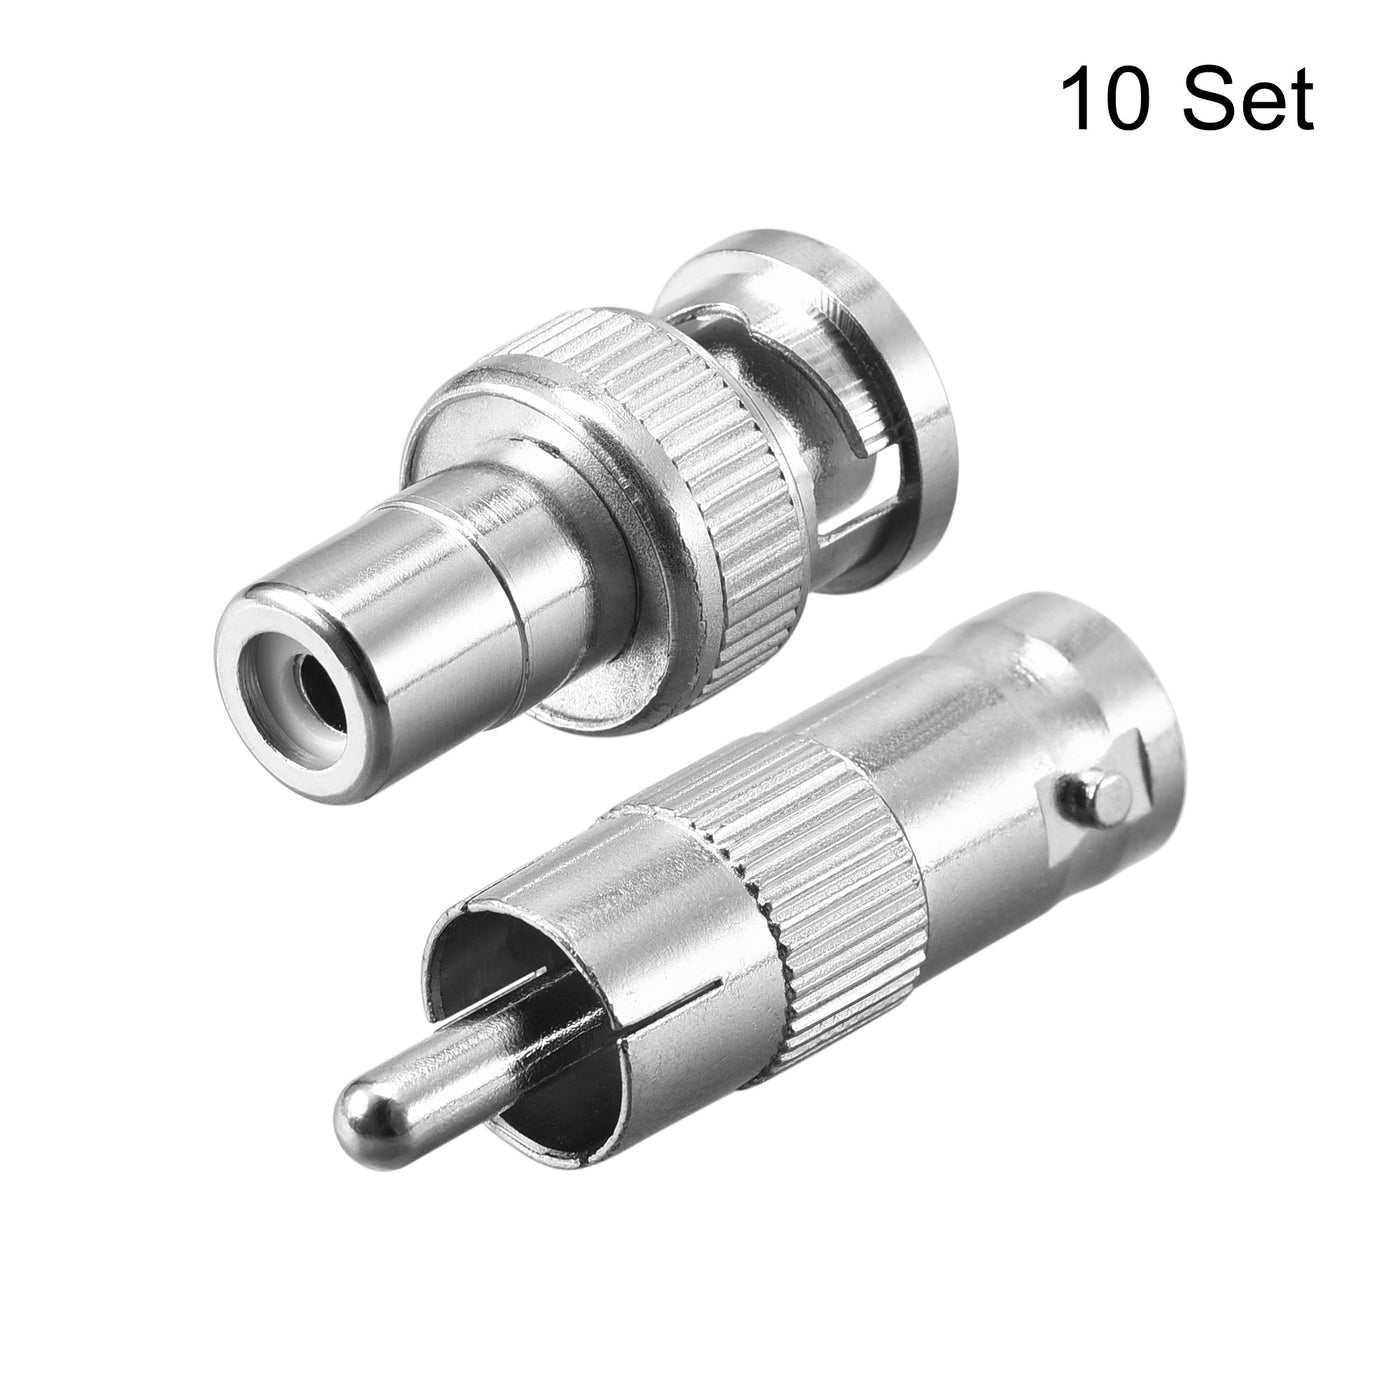 uxcell Uxcell BNC RCA Jack Adapter Connector for CCTV Camera, BNC Male to RCA Female 10pcs & BNC Female to RCA Male 10pcs